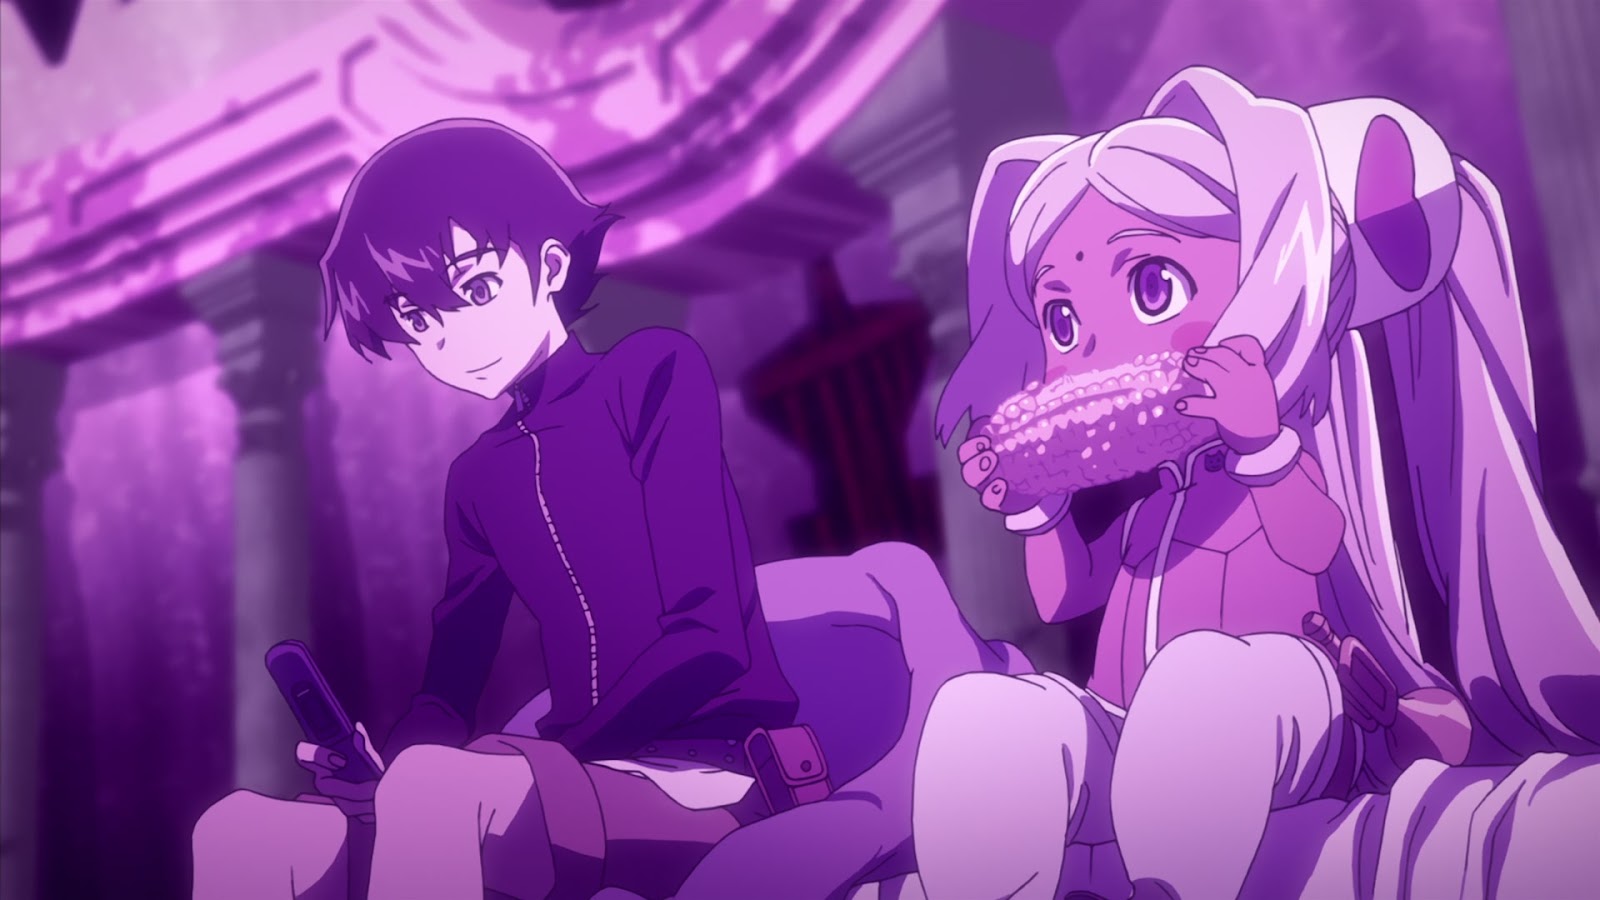 Anime: The Future Diary Review